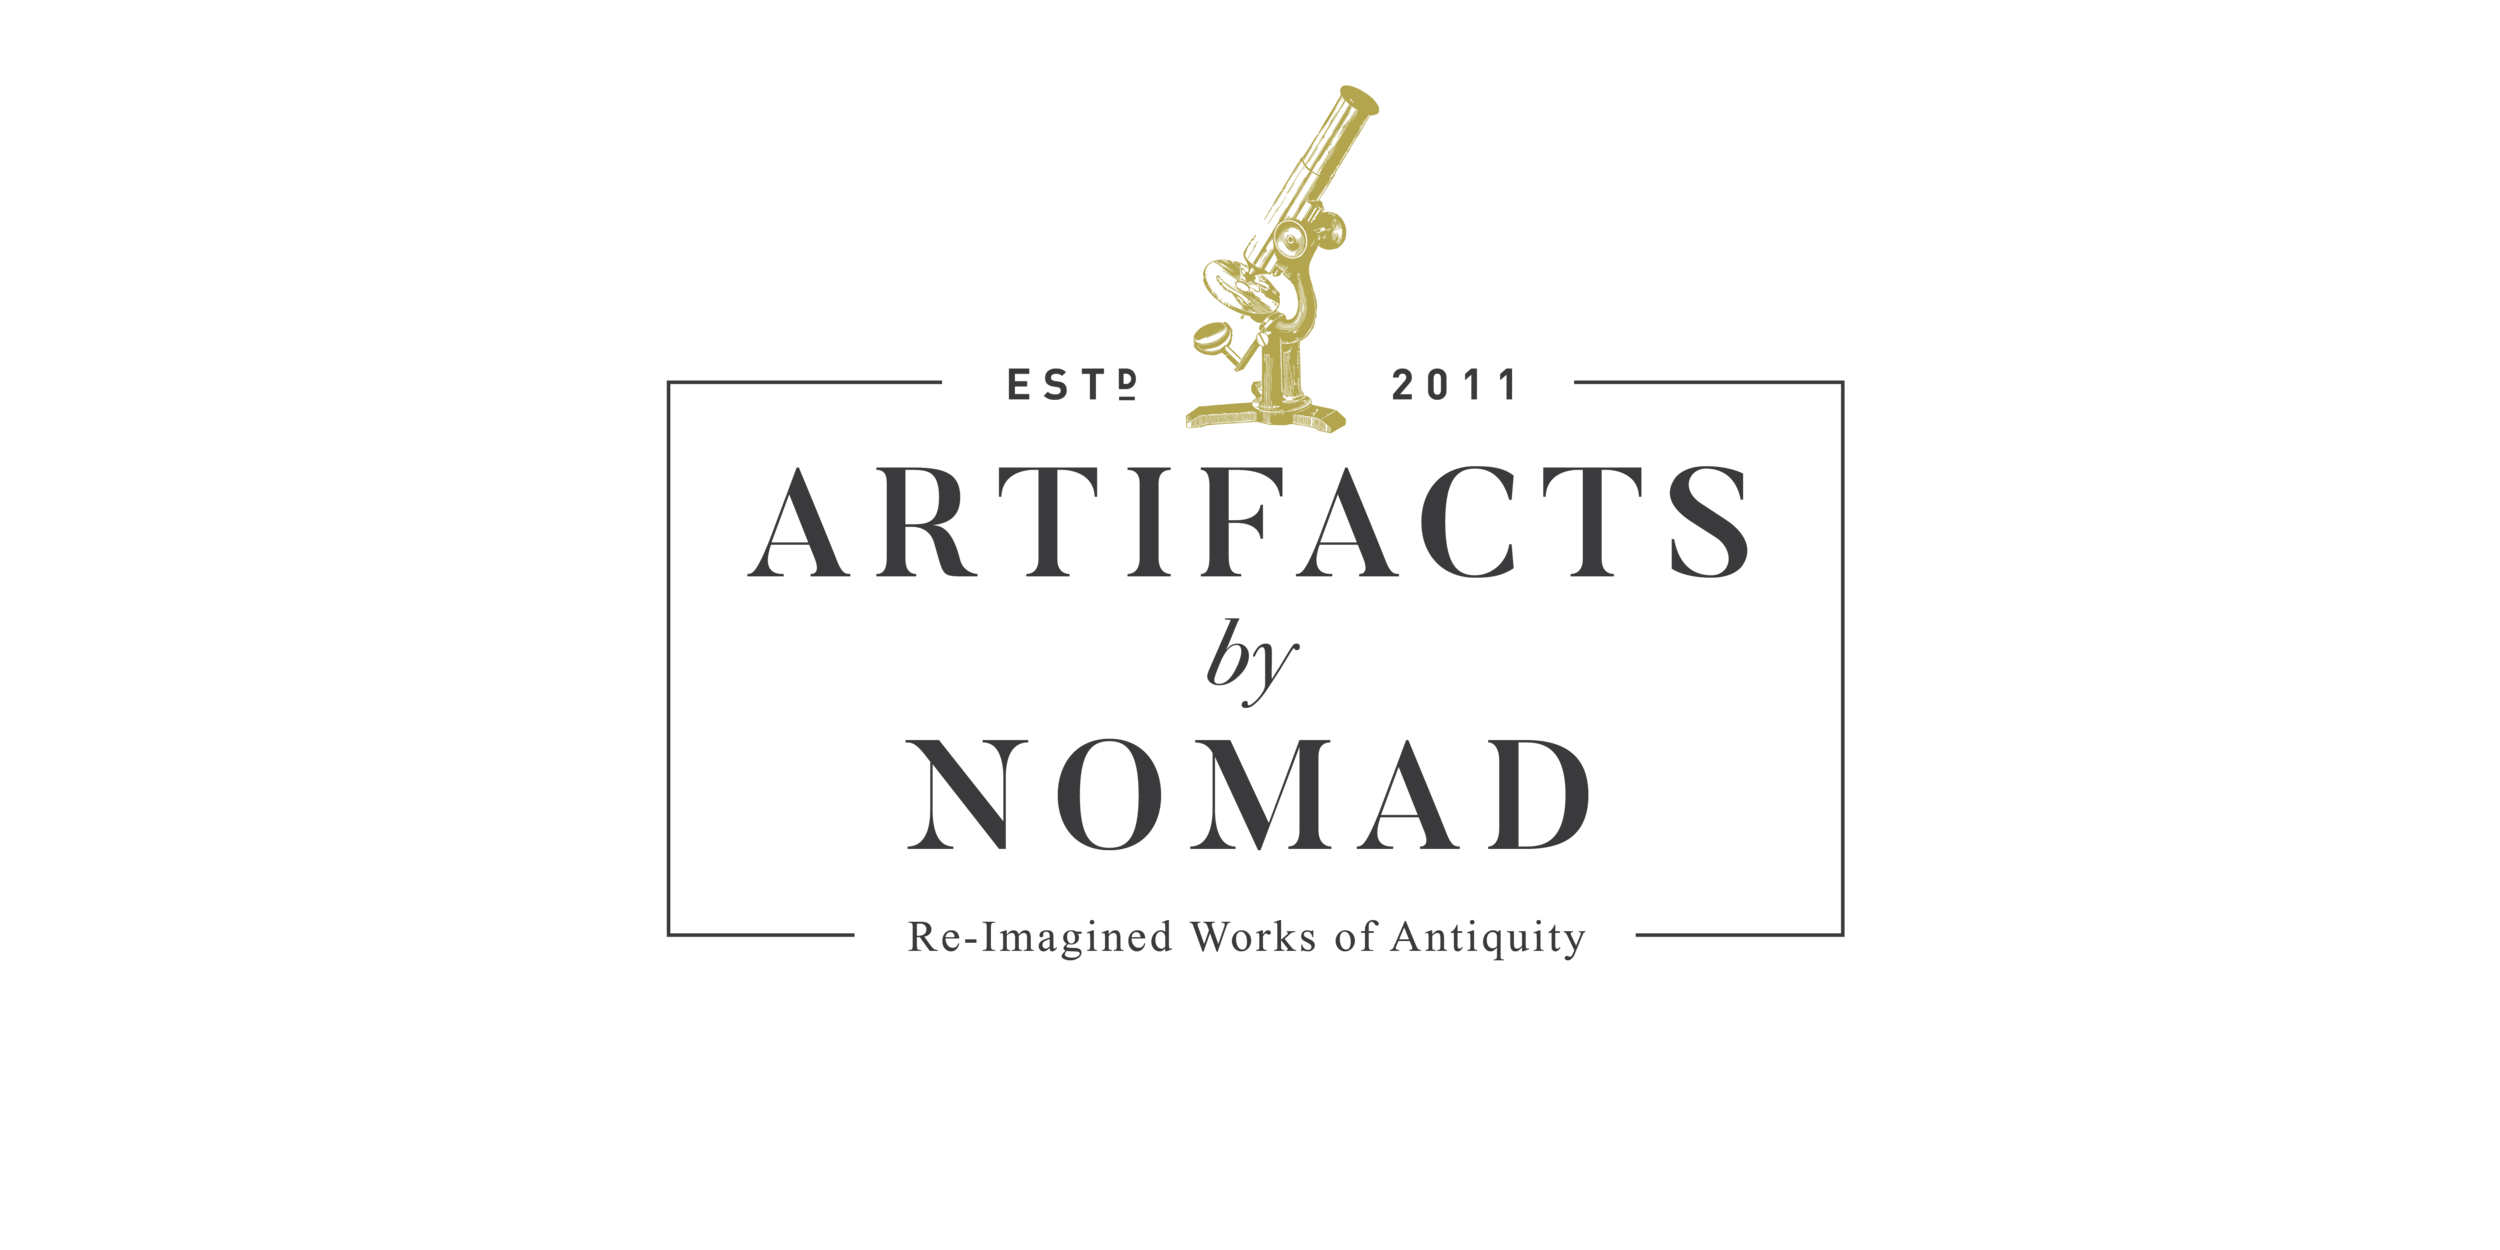 Artifacts by Nomad